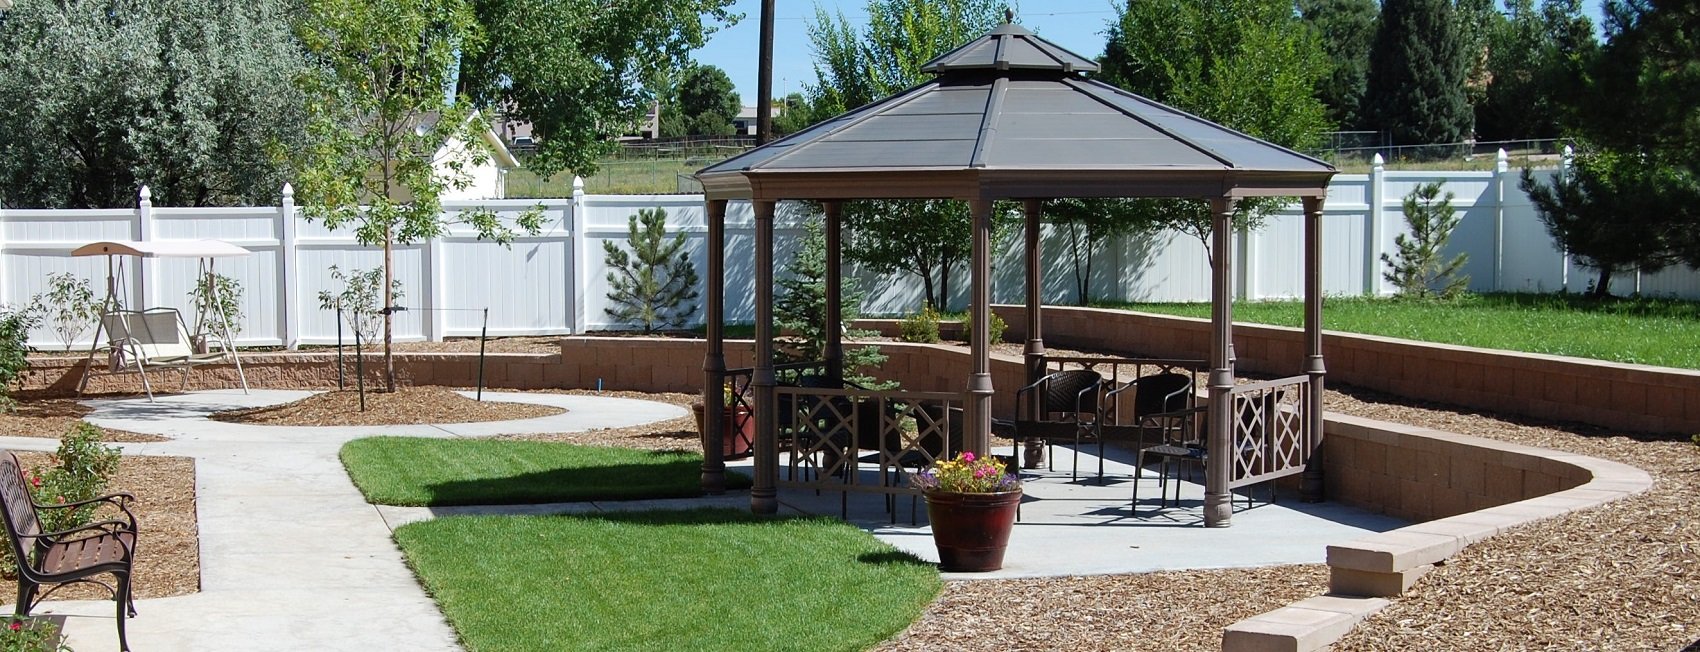 New Day Cottages: Assisted Living in Colorado Springs